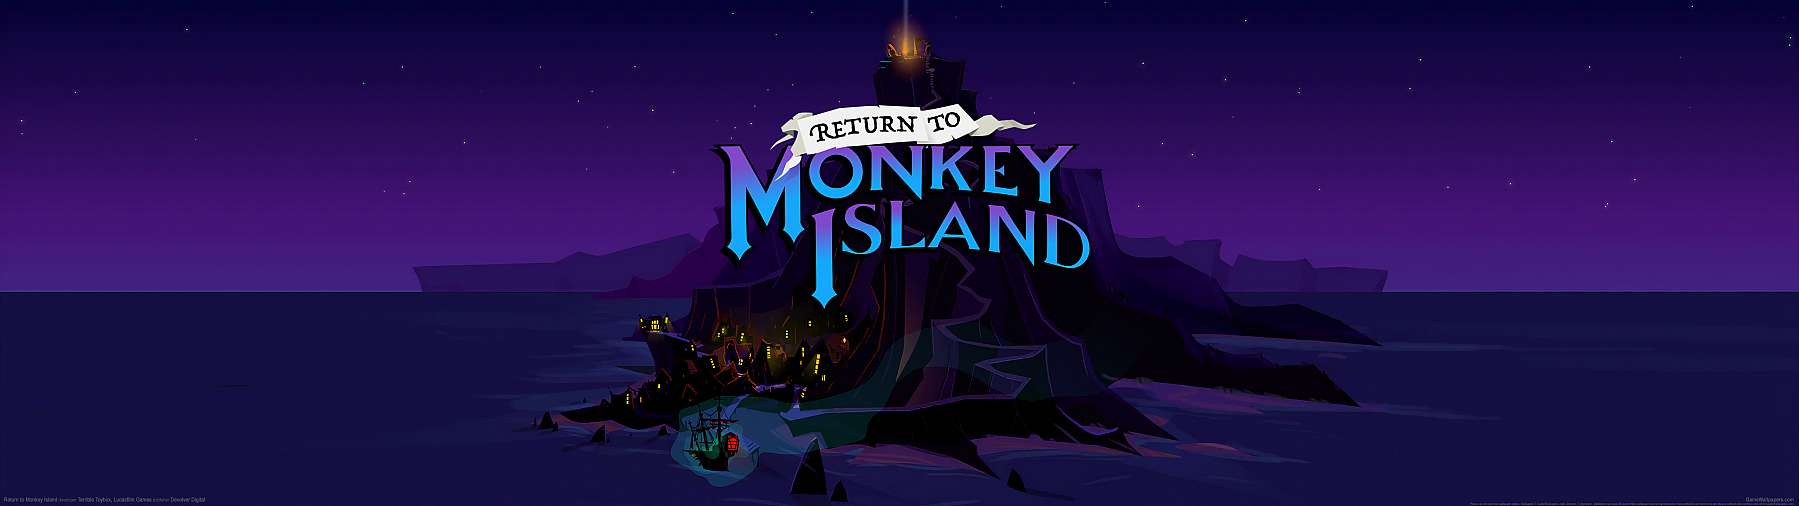 Return to Monkey Island superwide wallpaper or background 02